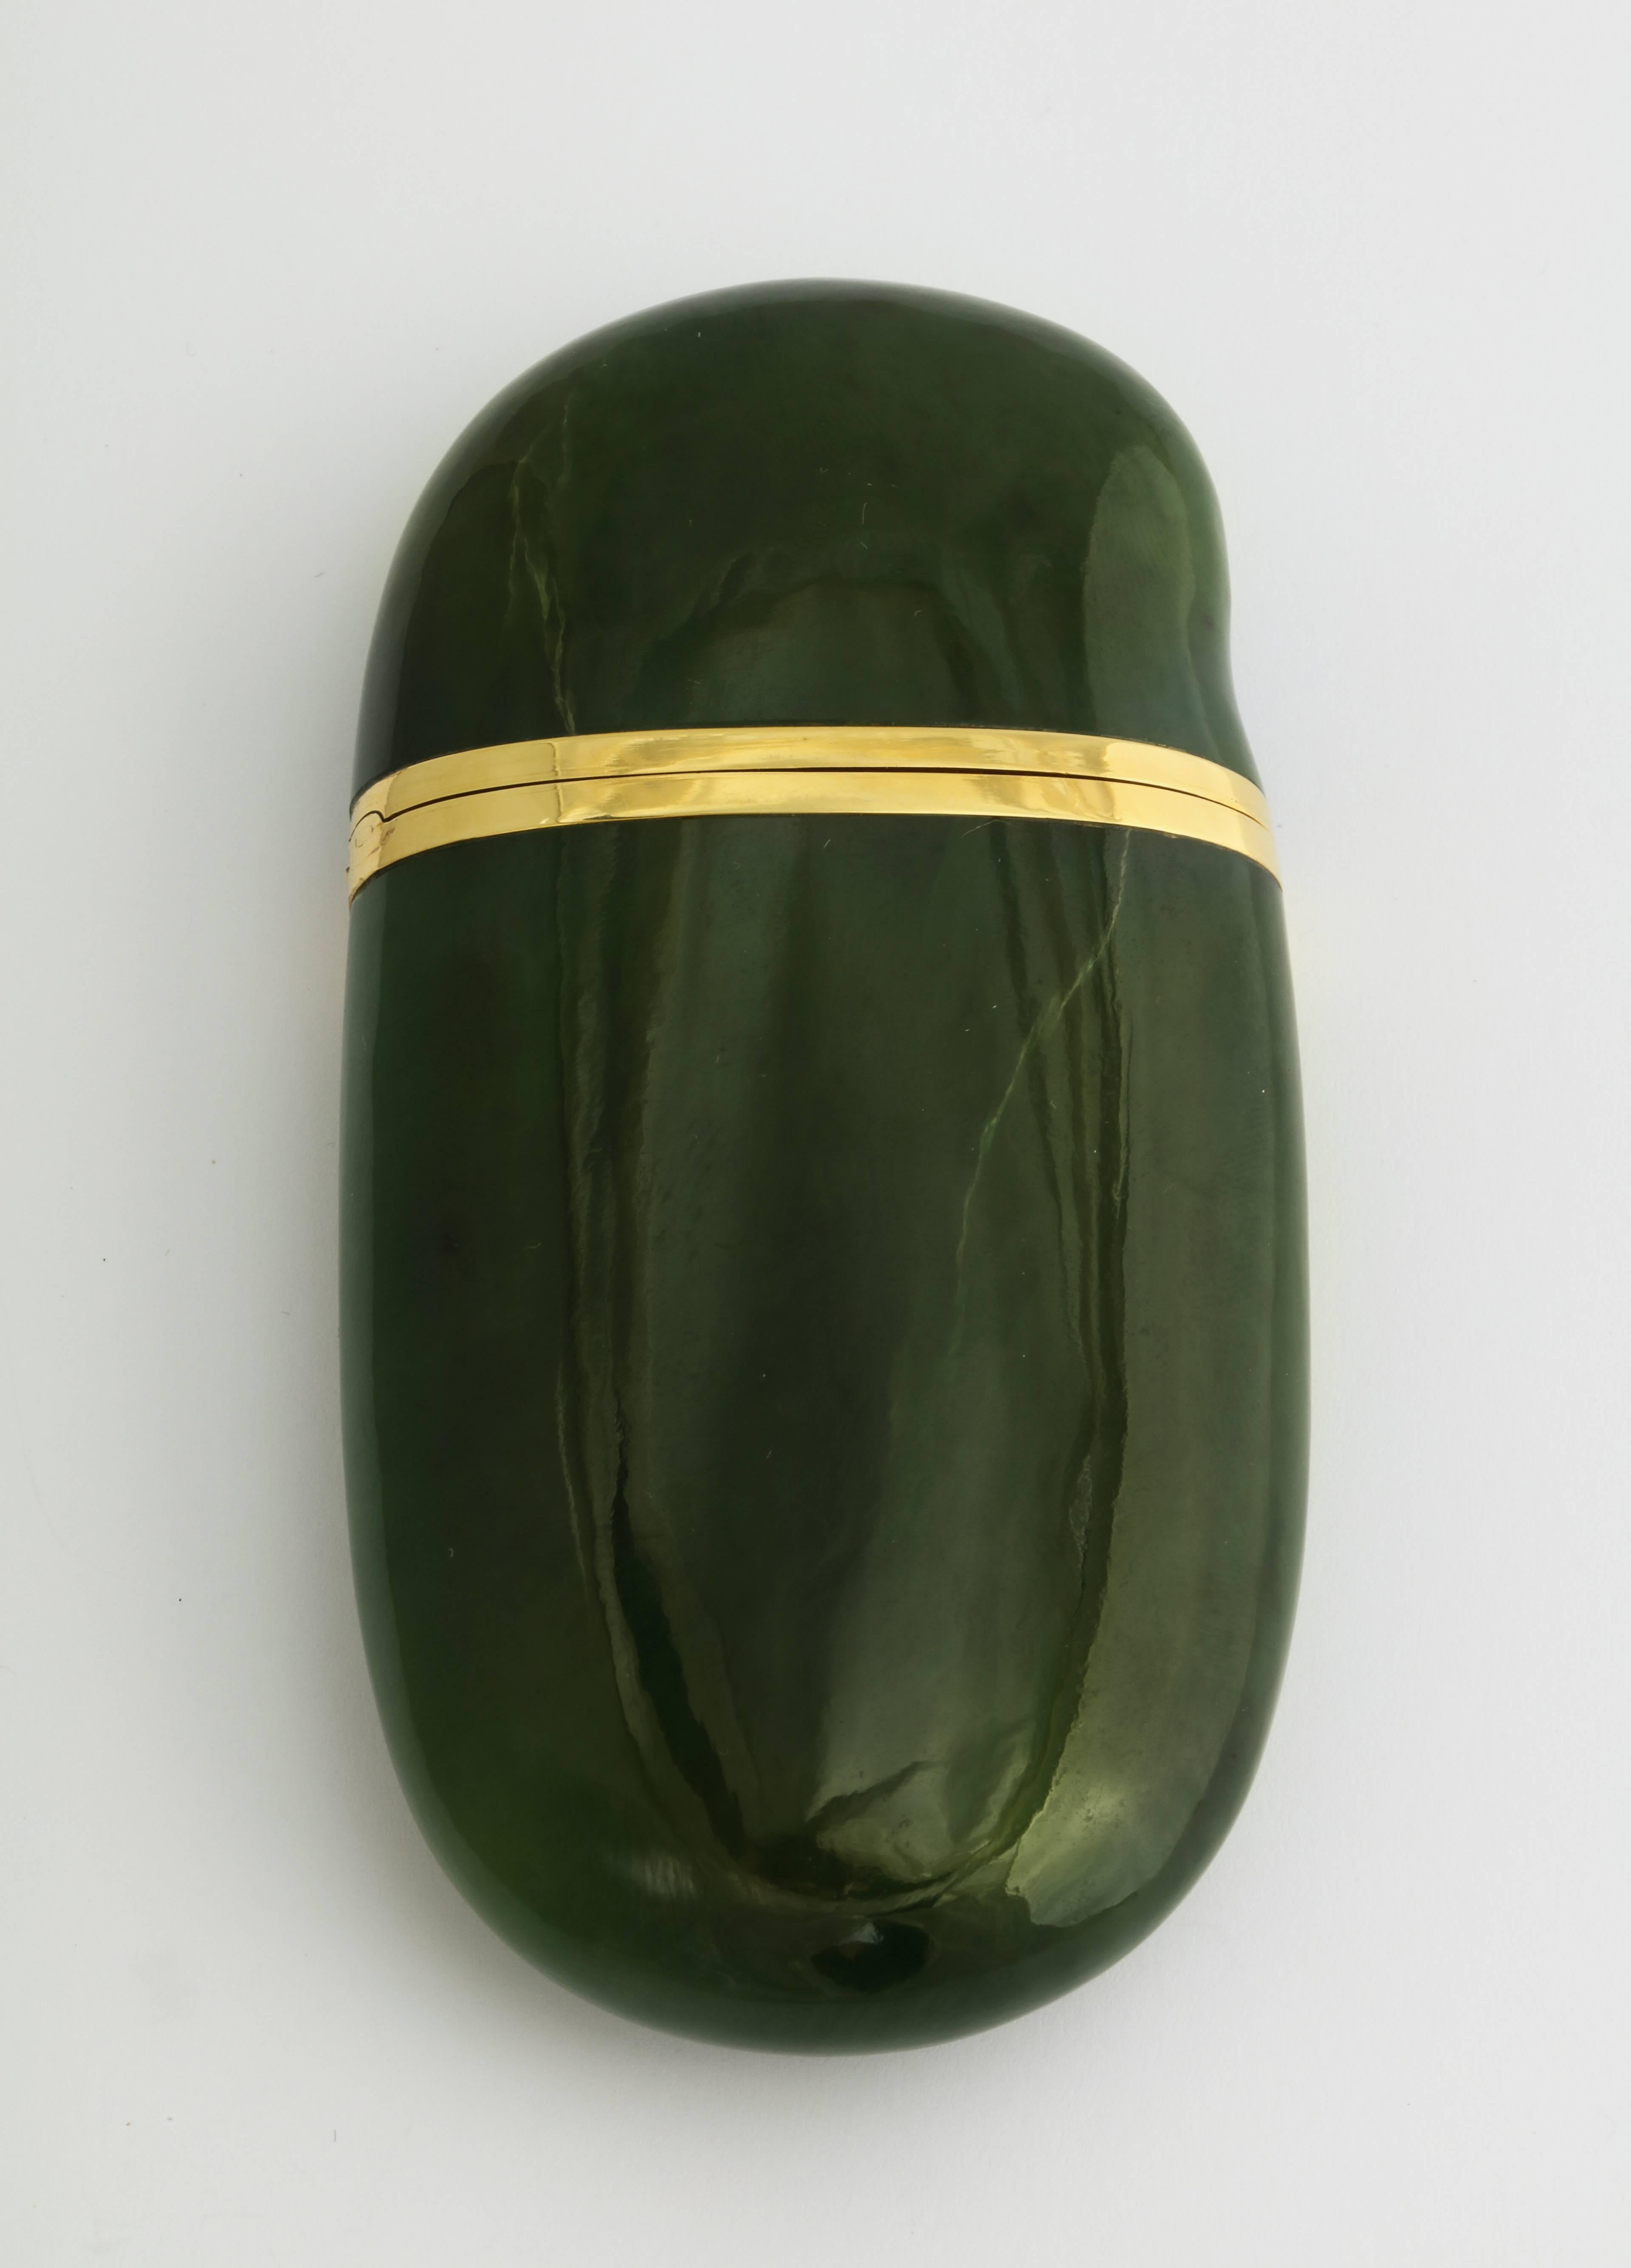 Recently sourced from a New York socialite, this hand carved jade and gold mounted evening bag is one of few ever made (3 in black and 3 in green), and is possibly the last to survive. Designed by Elsa Perretti for the 1976 Tiffany catalog, this